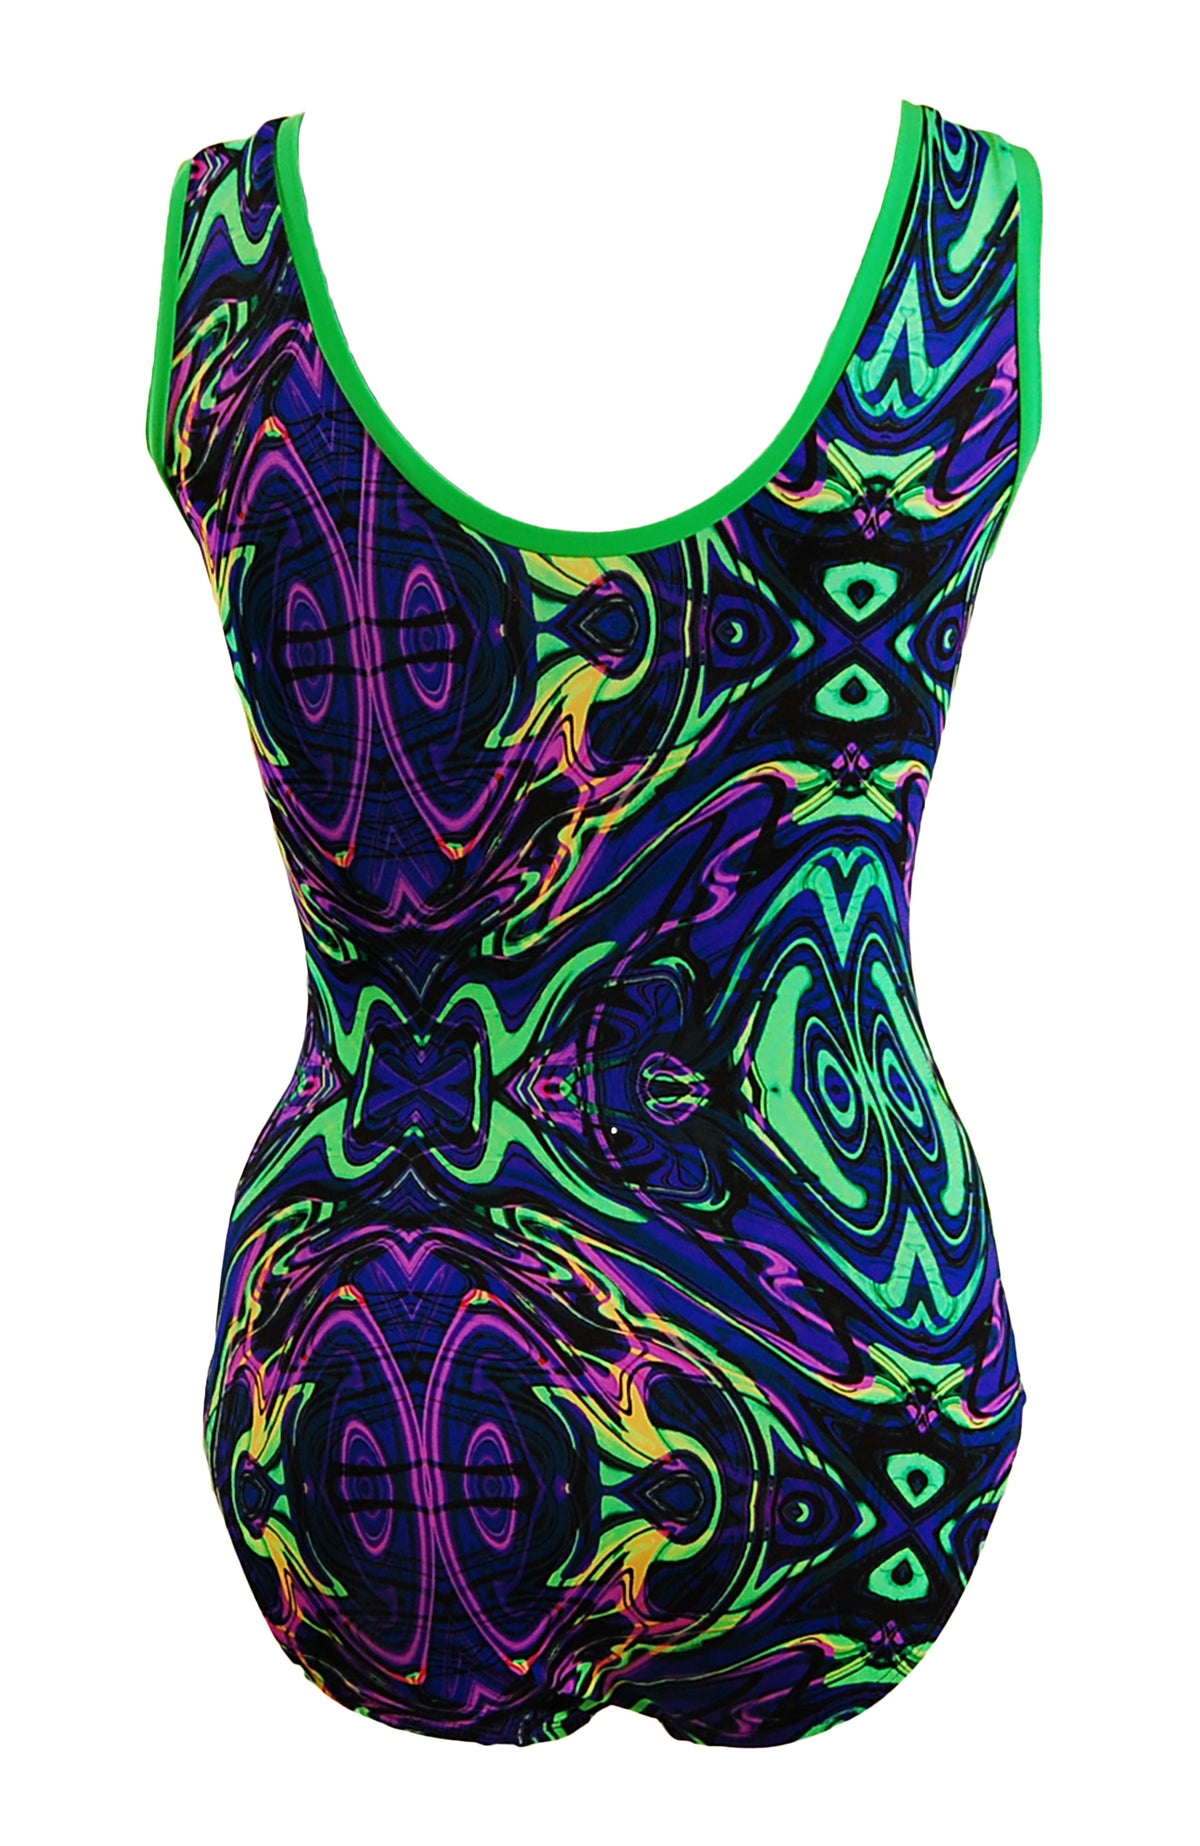 Back view of Tank style leotard purple/black/pink/lime